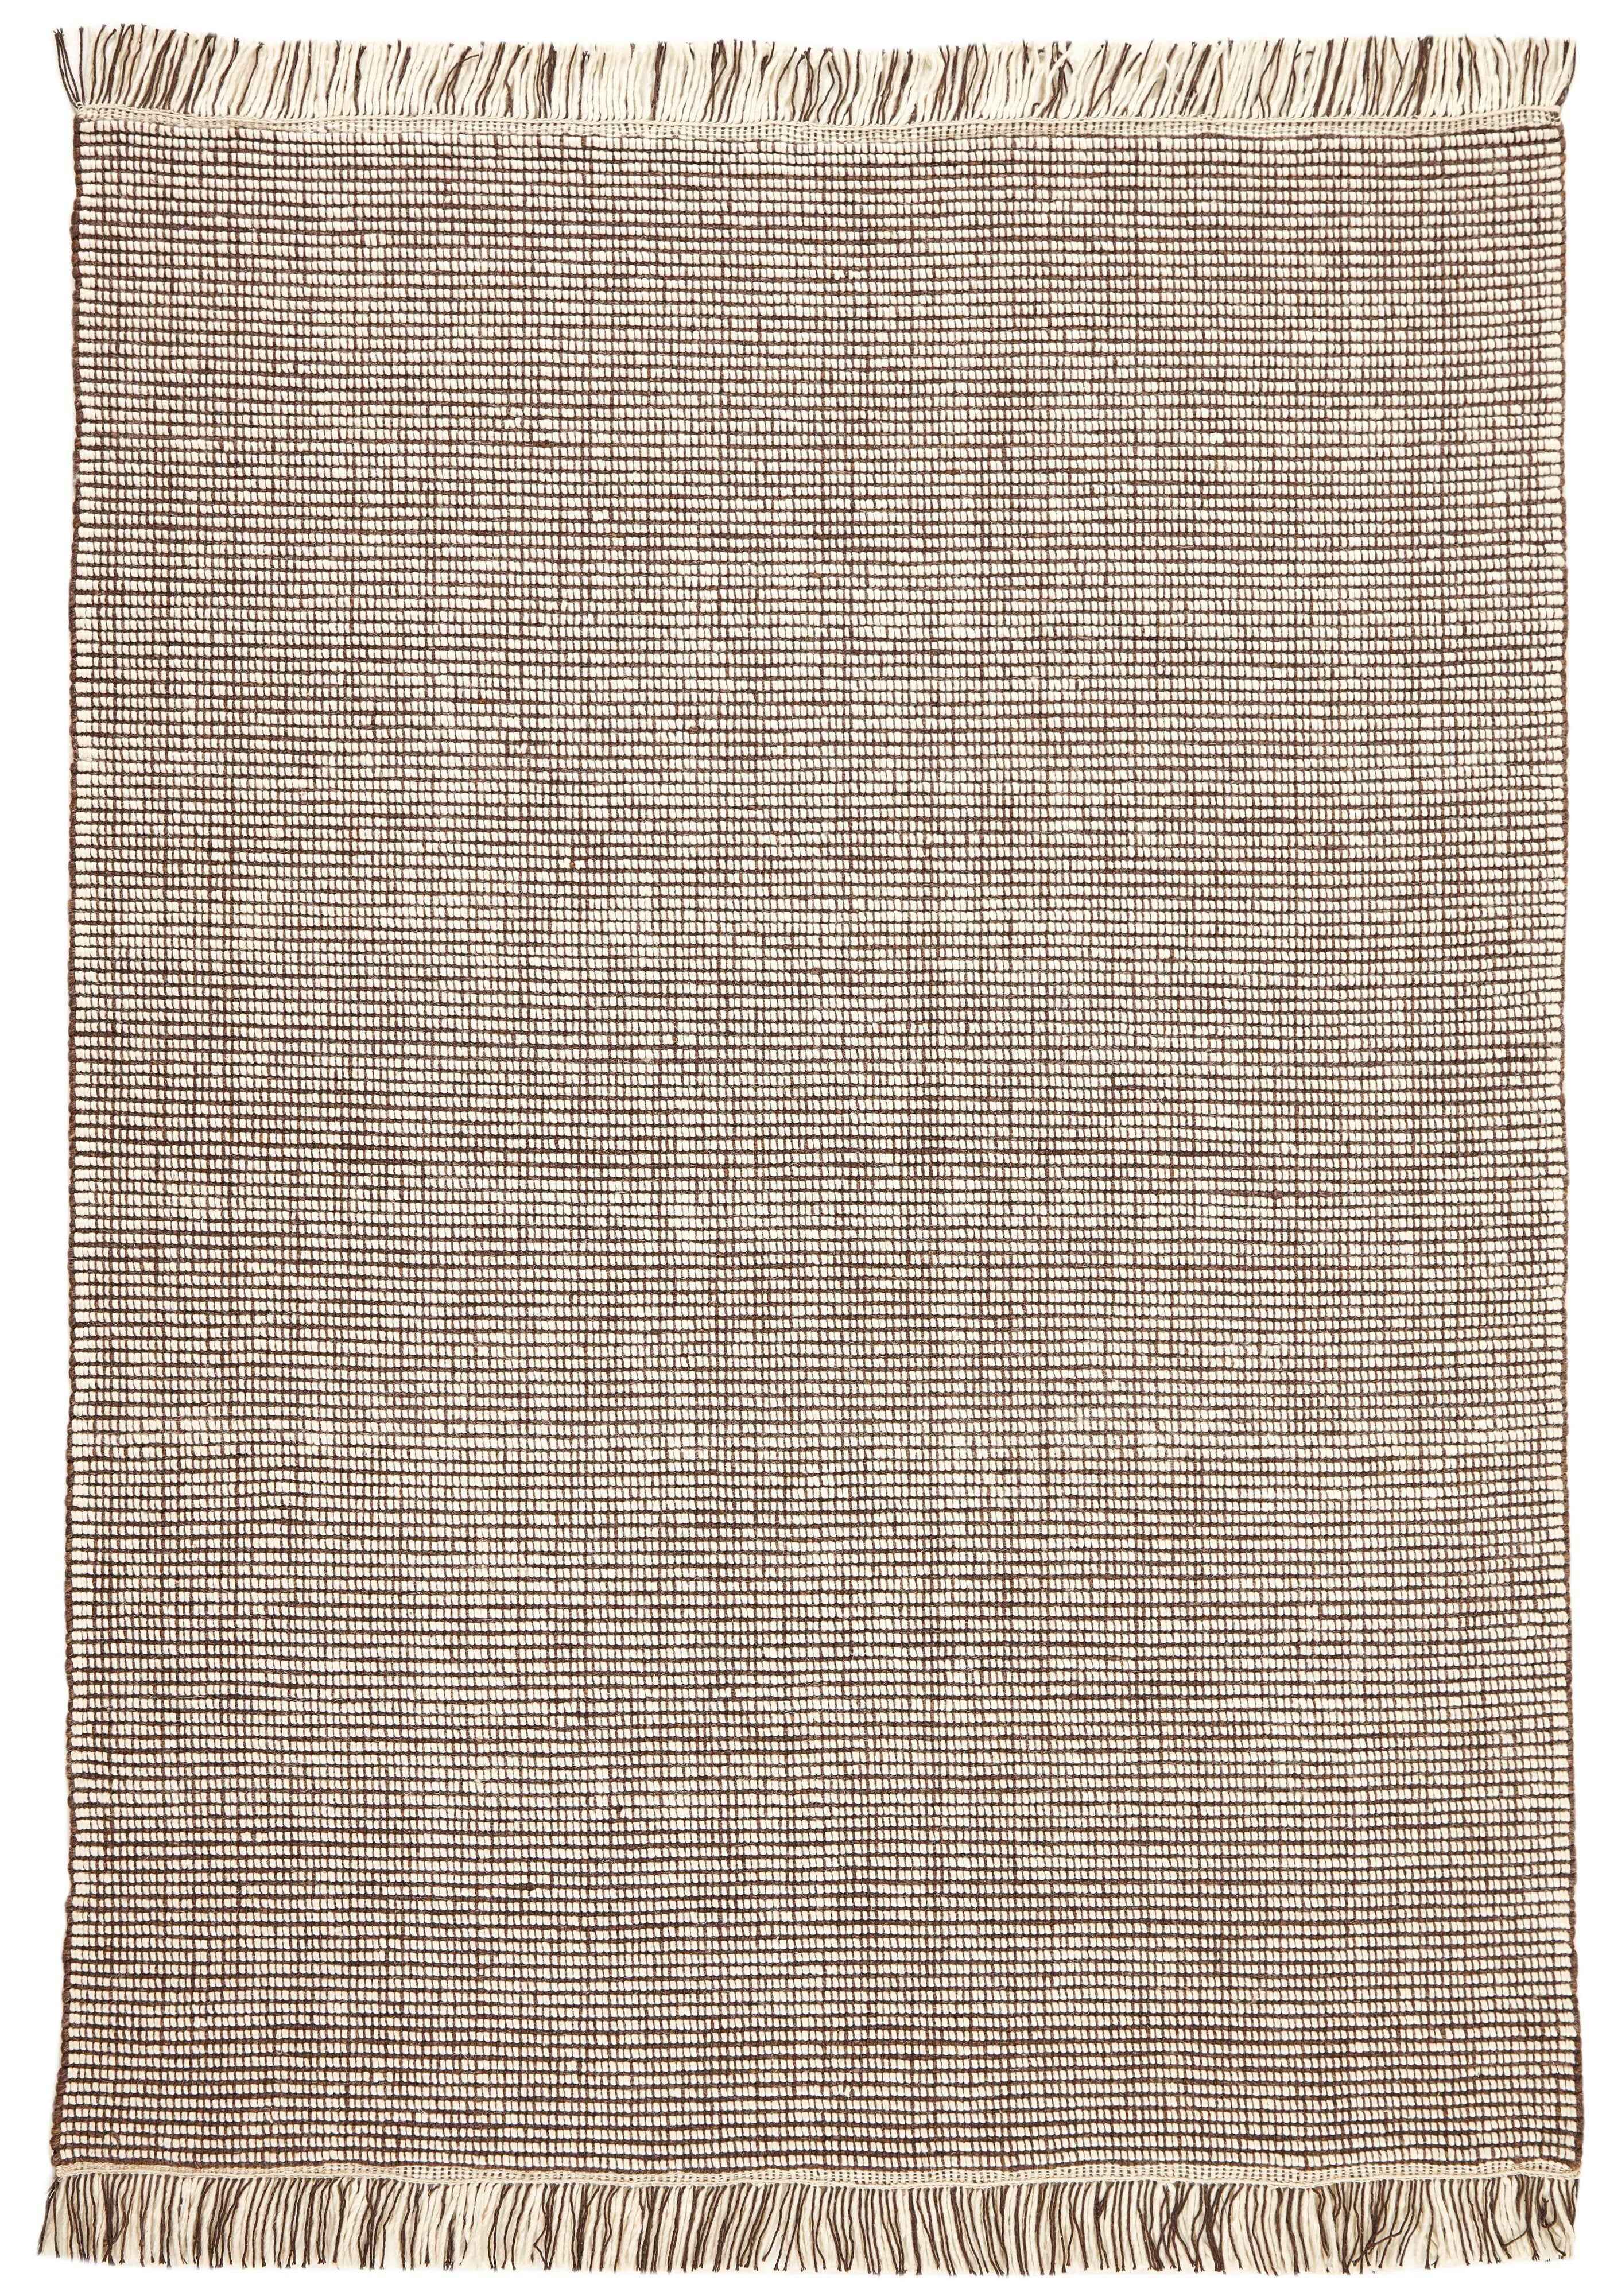 90x90 cm Indian Wool Multicolor Rug-5971A, Brown White - Rugmaster